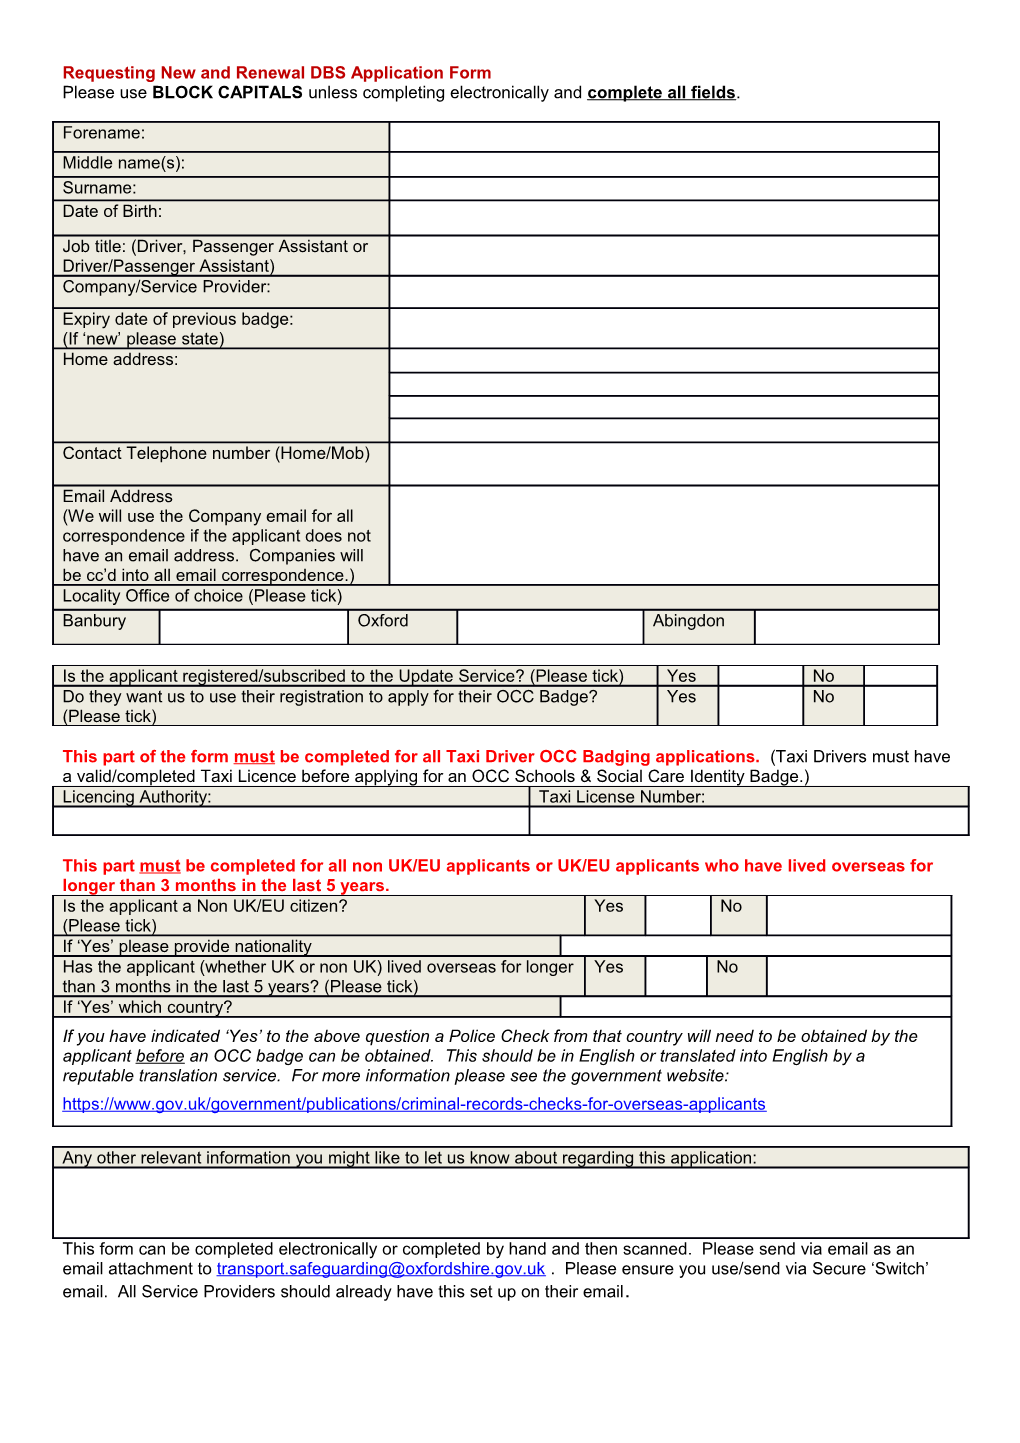 Requesting New and Renewal DBS Application Form